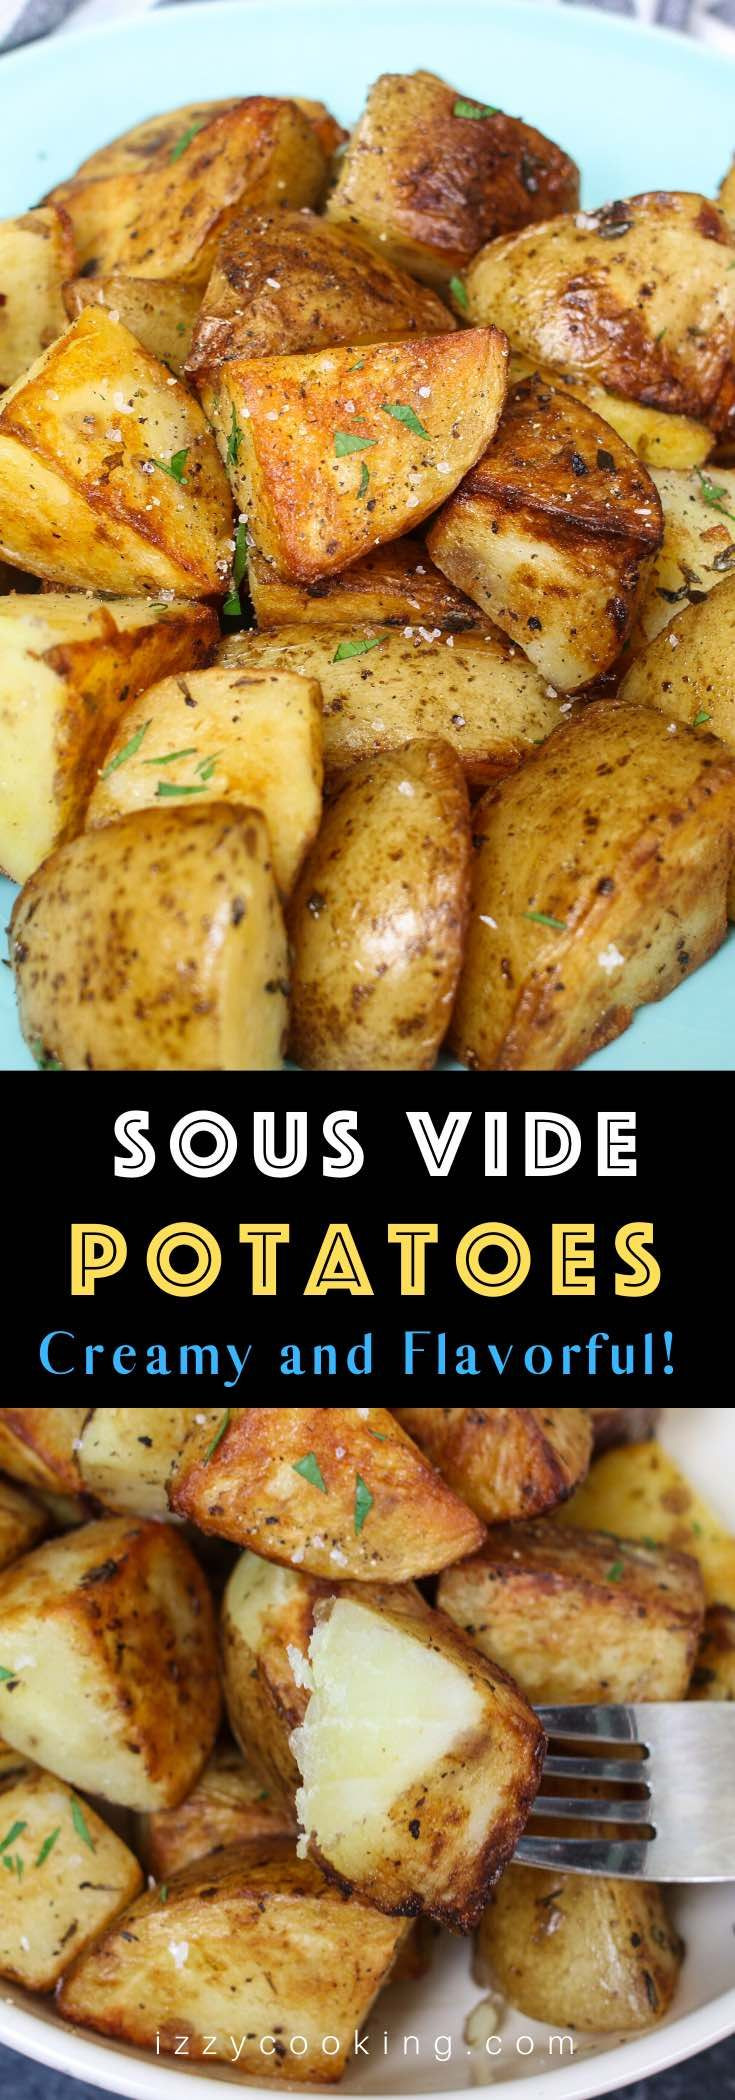 Sous Vide Side Dishes
 Garlic Herb Sous Vide Potatoes are so creamy fluffy and